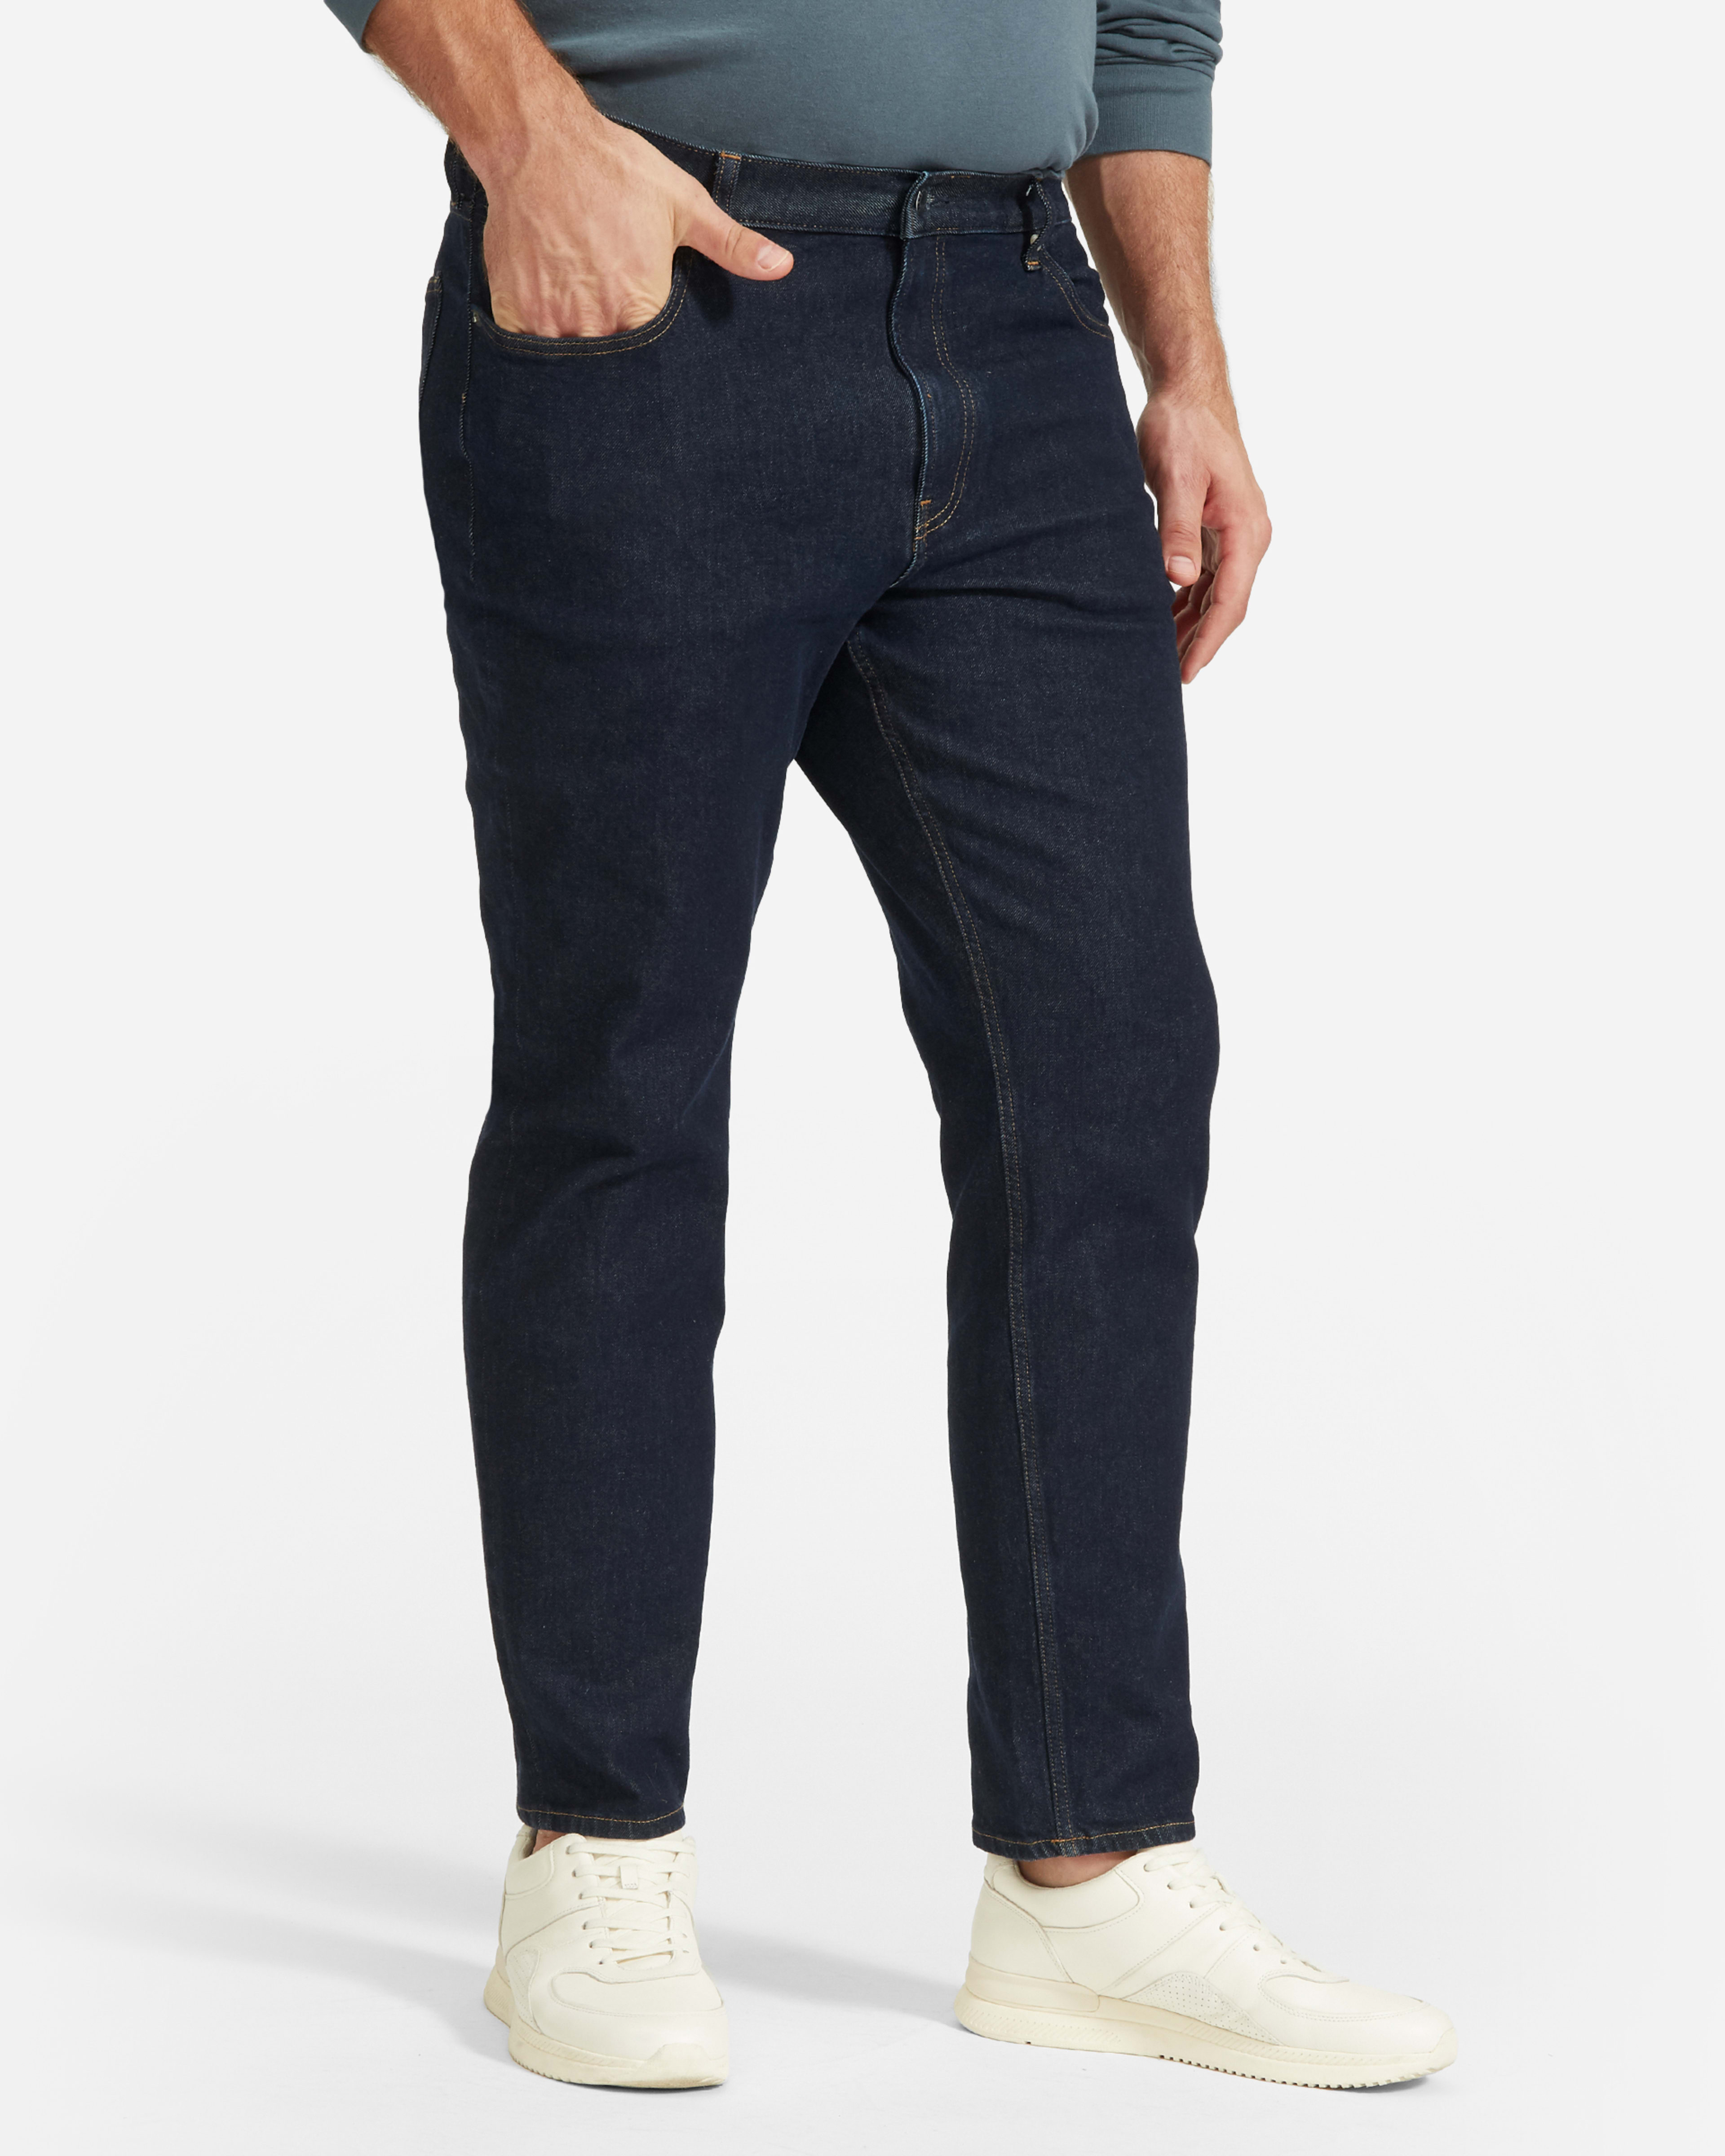 The Athletic Fit Jean